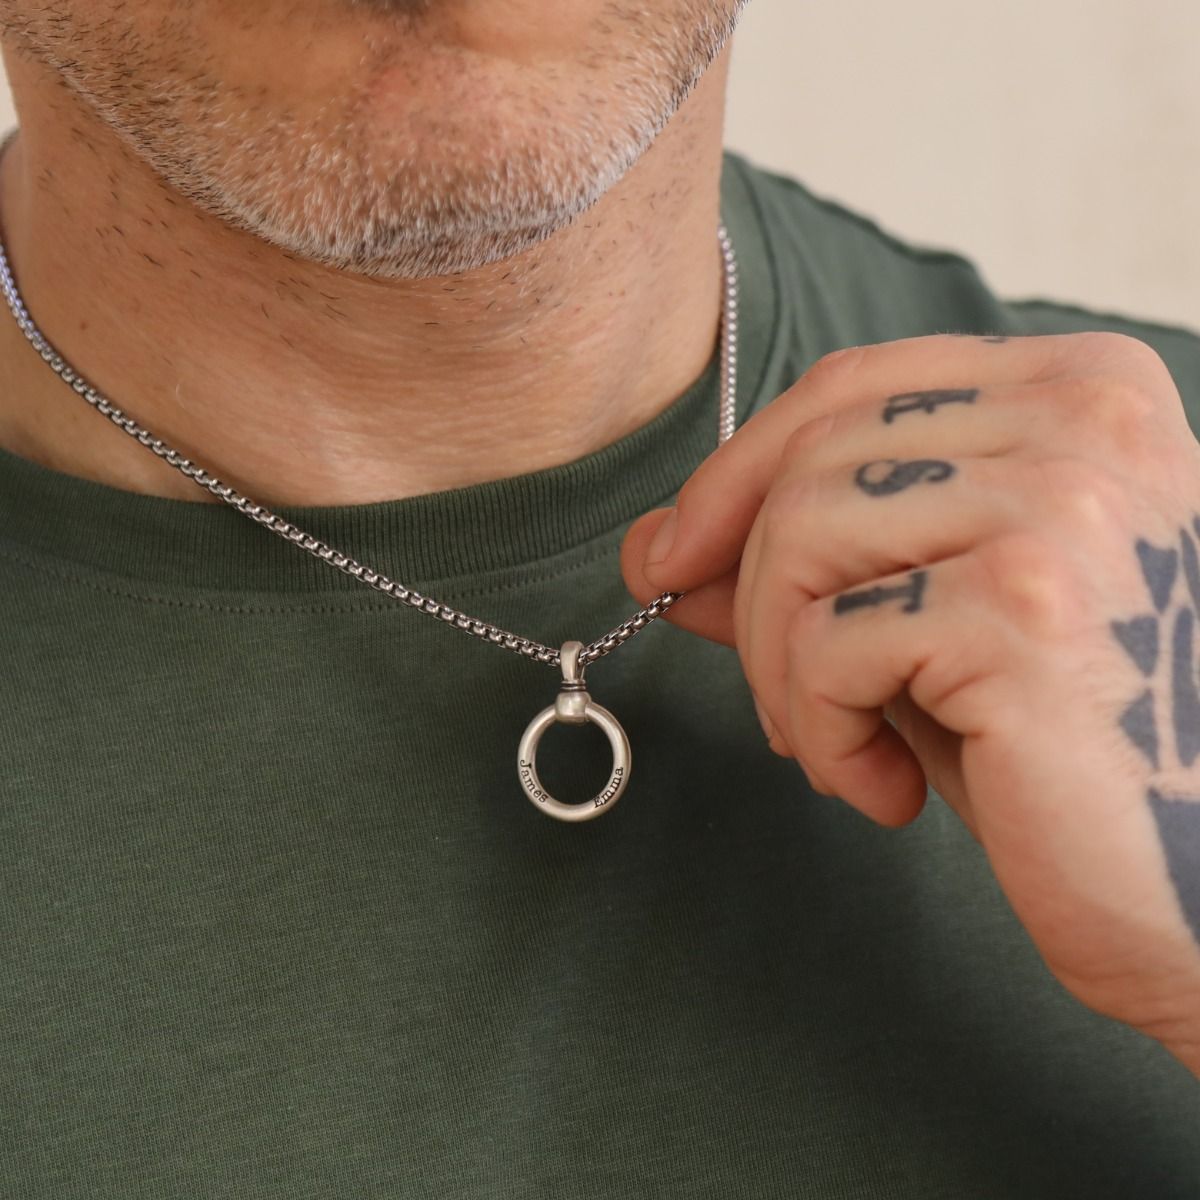 Buy Personalised Men's Russian Ring Necklace Online in India - Etsy